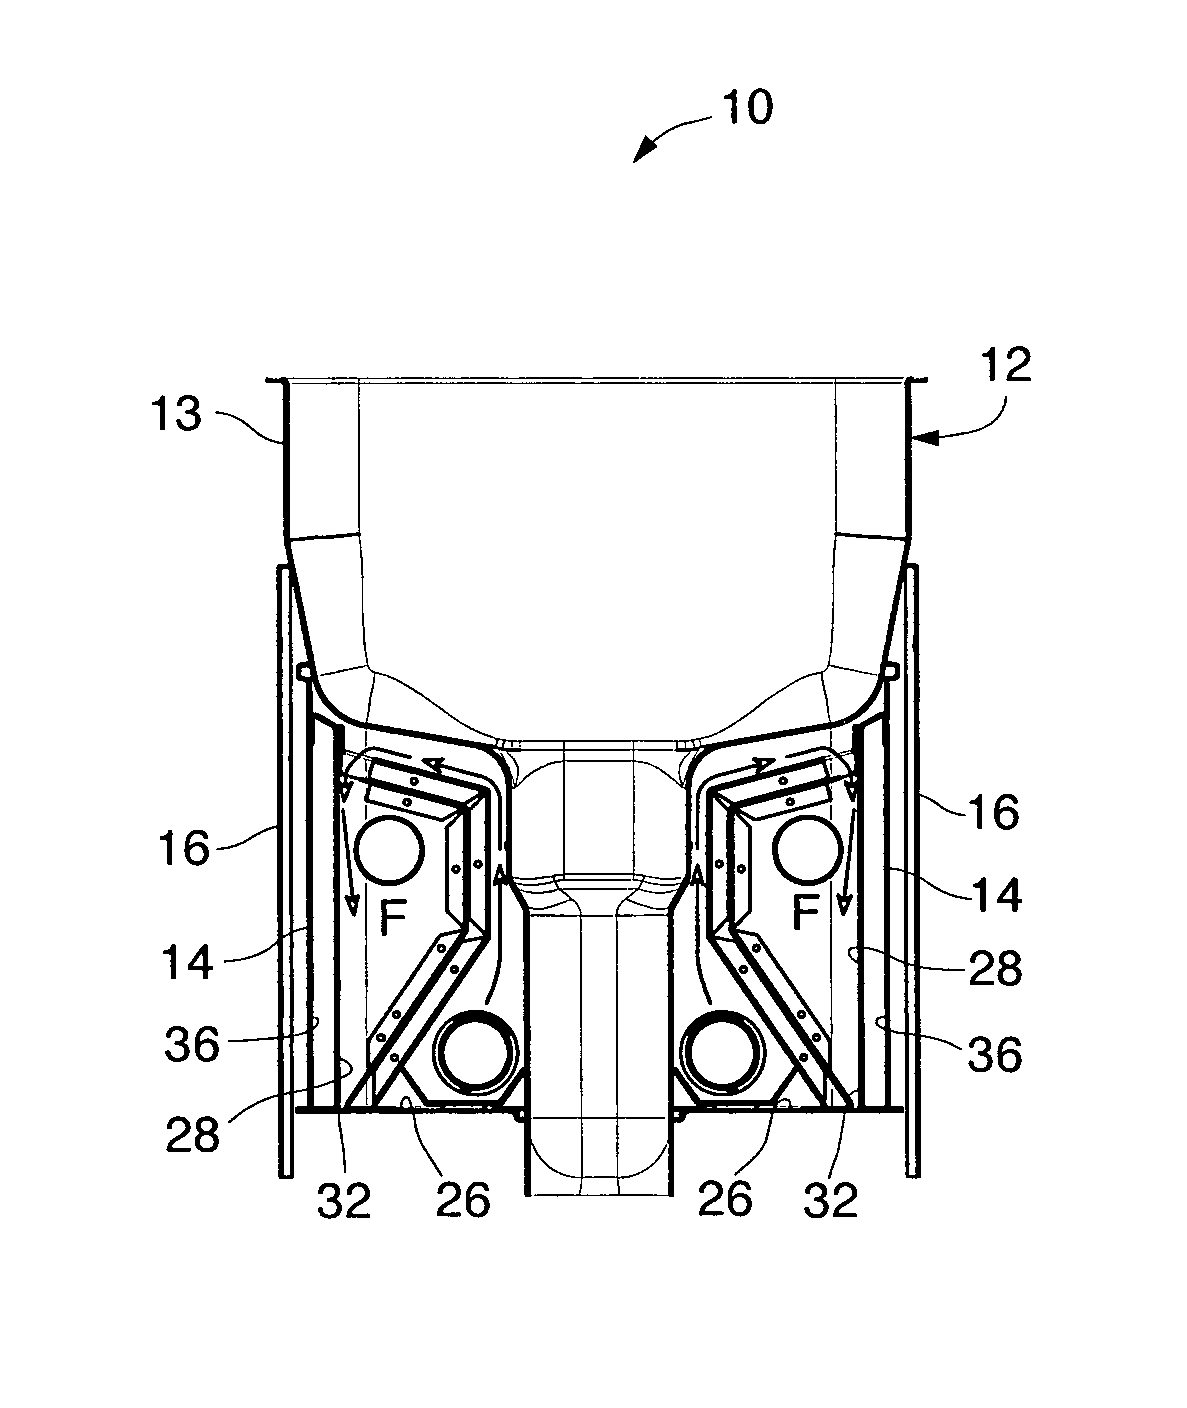 Pan-type apparatus to fry or boil food products